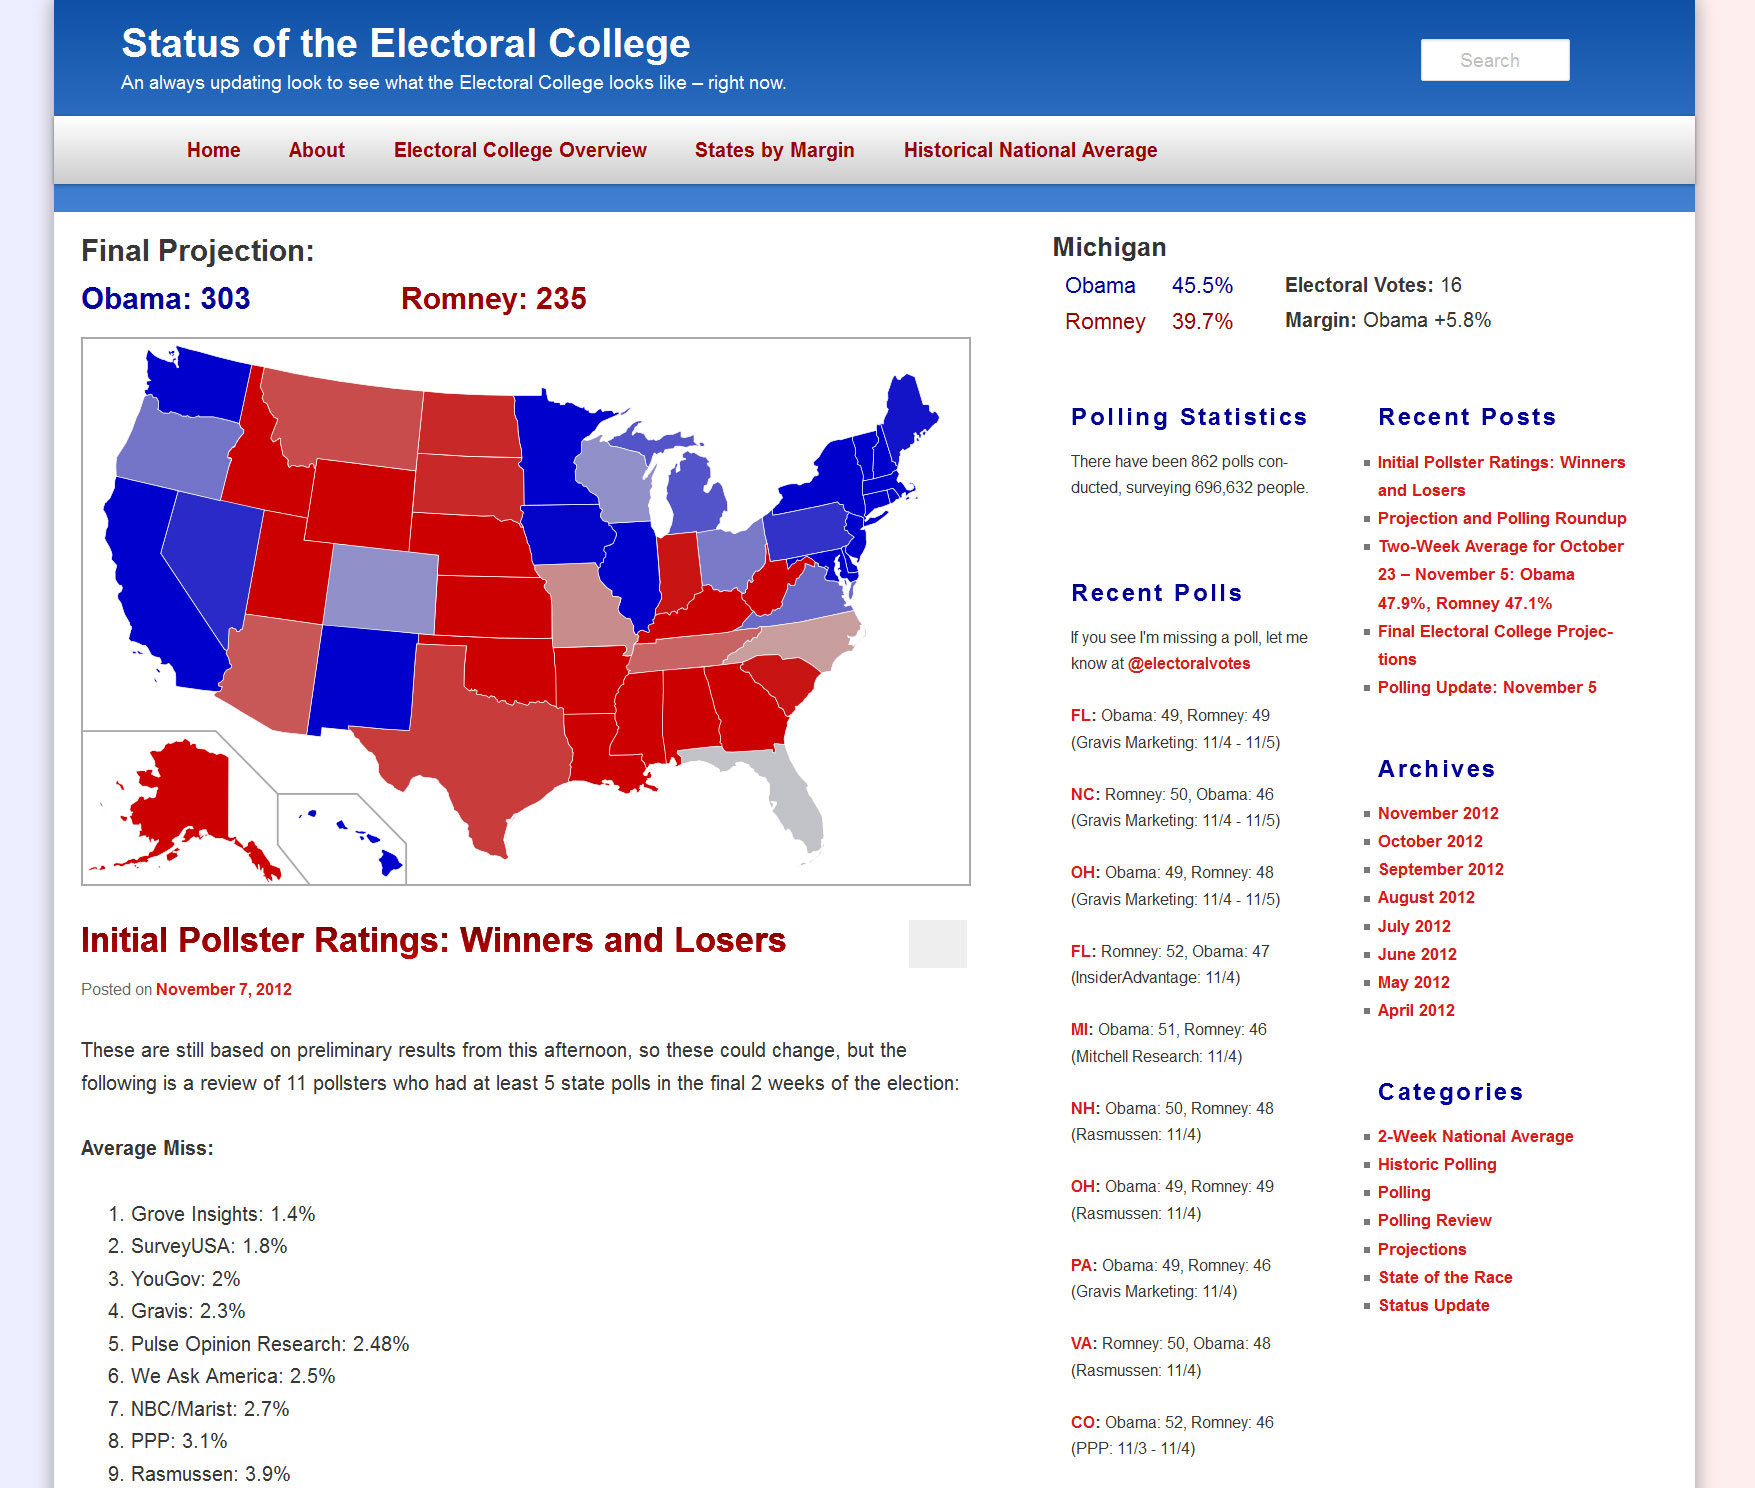 Status of the Electoral College (2008, 2012)